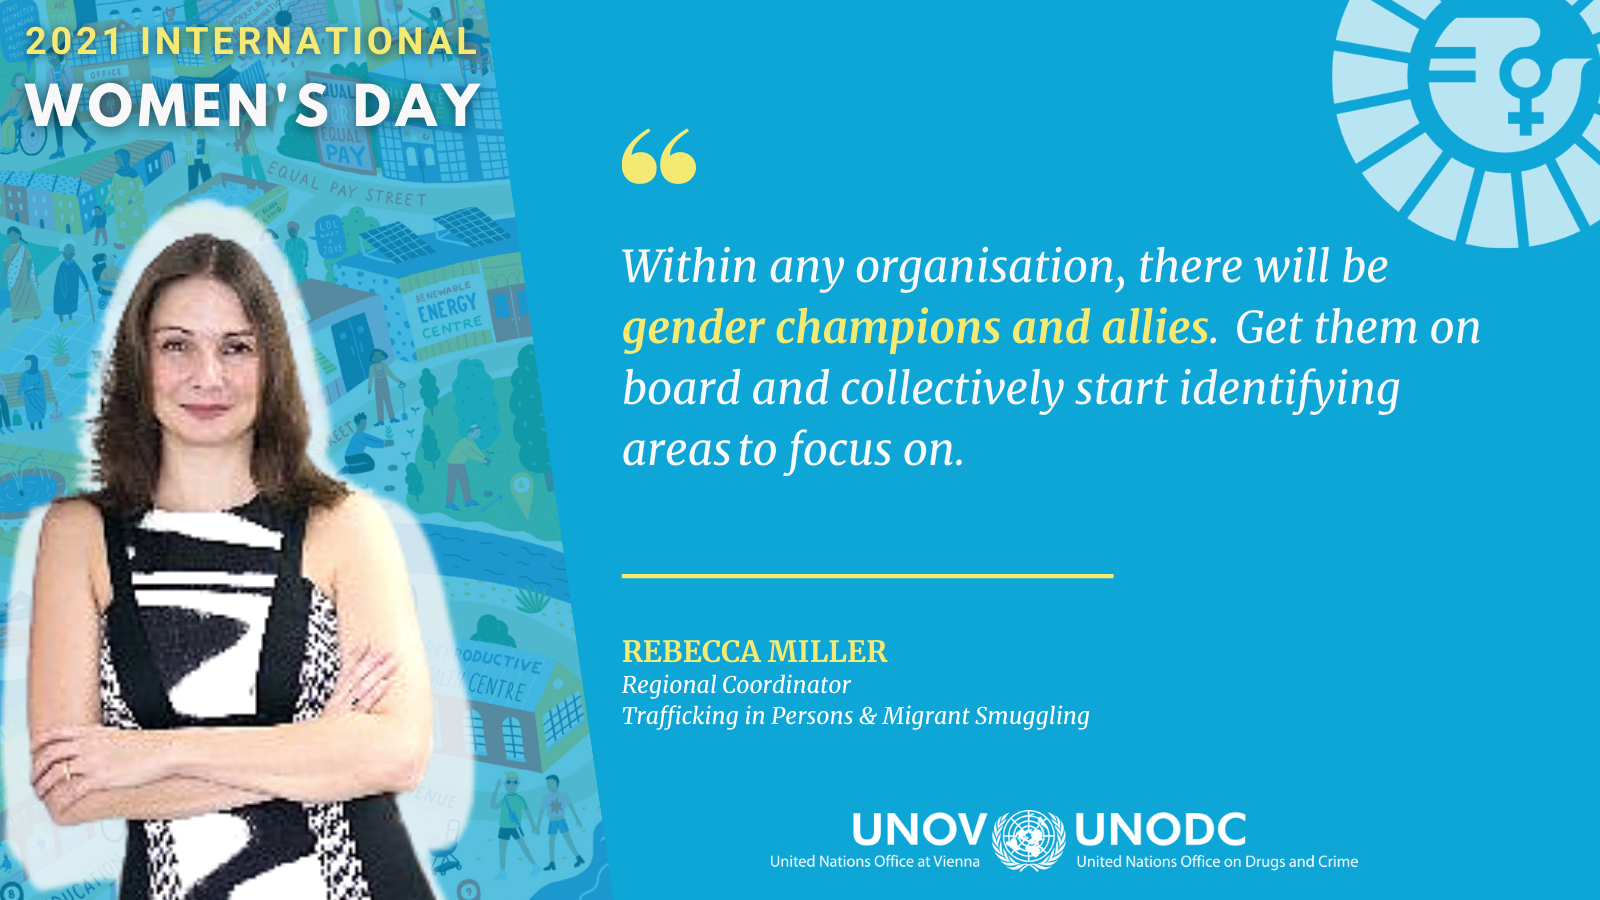 Quote of Rebecca Miller "Within any organisation, there will be gender champions and allies.  Get them on board and collectively start identifying areas to focus on."